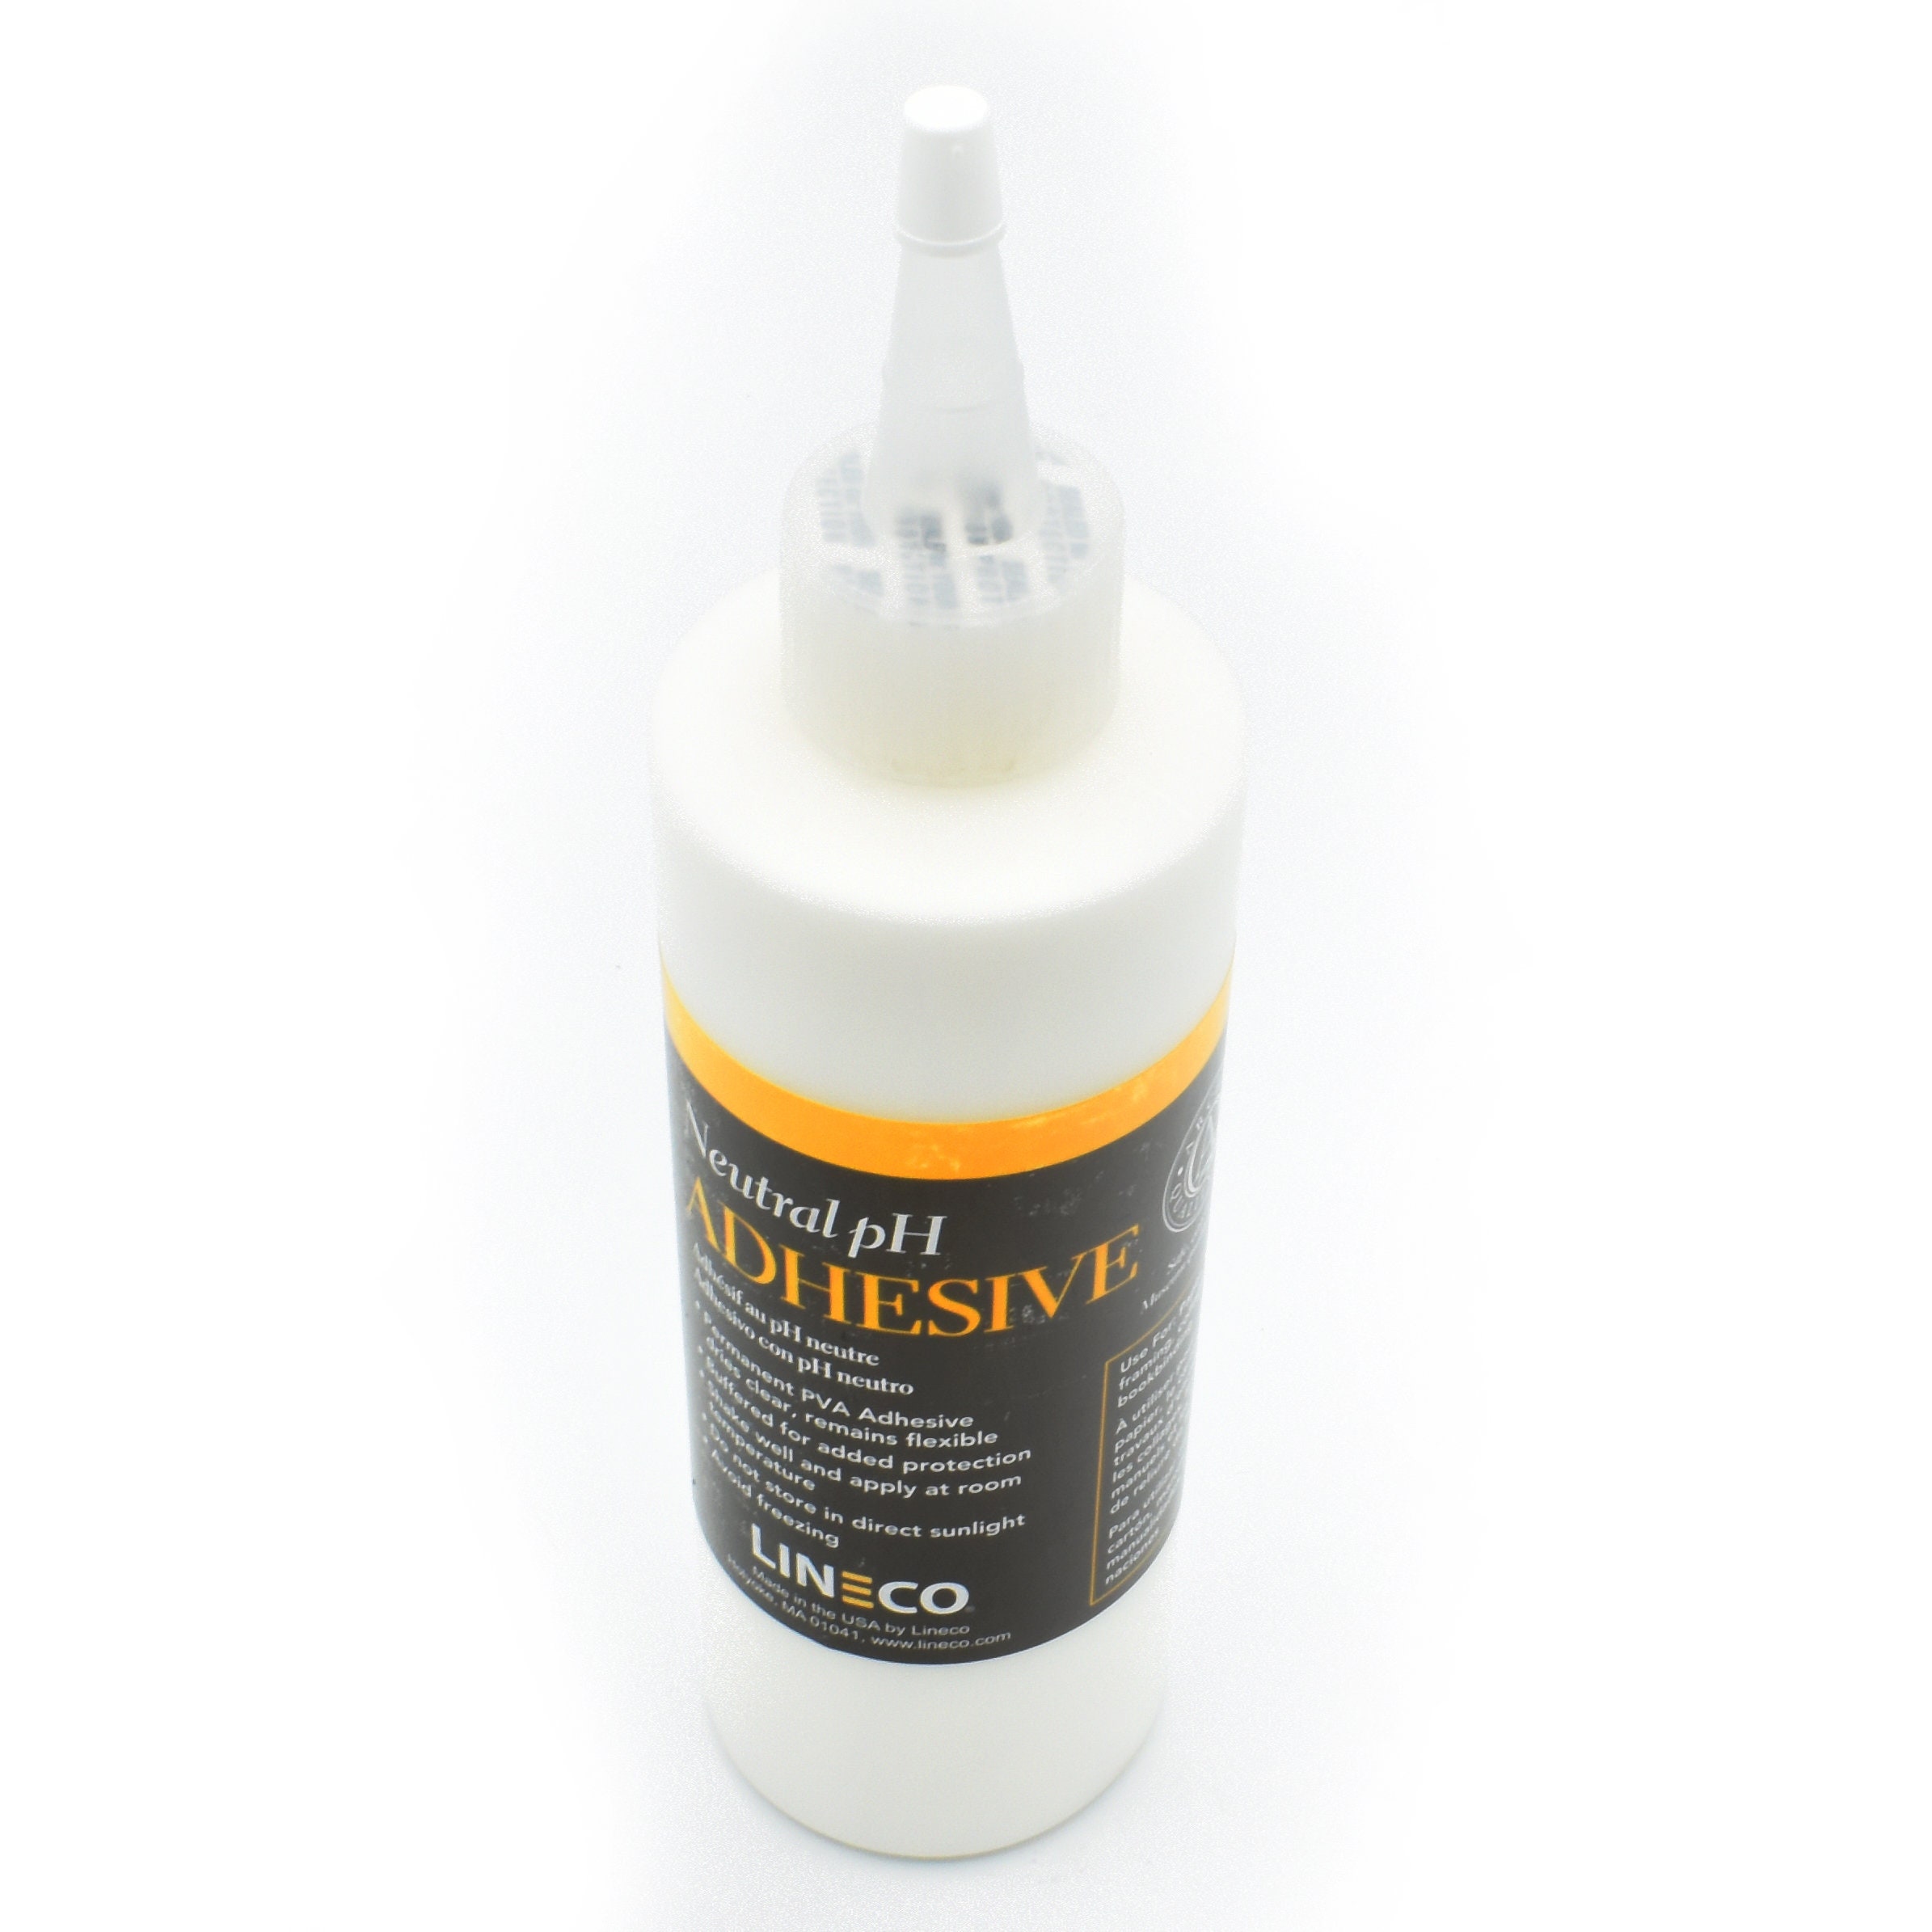 165.42 Eur/l Glossy Accents 59 Ml Synthetic Resin Adhesive 